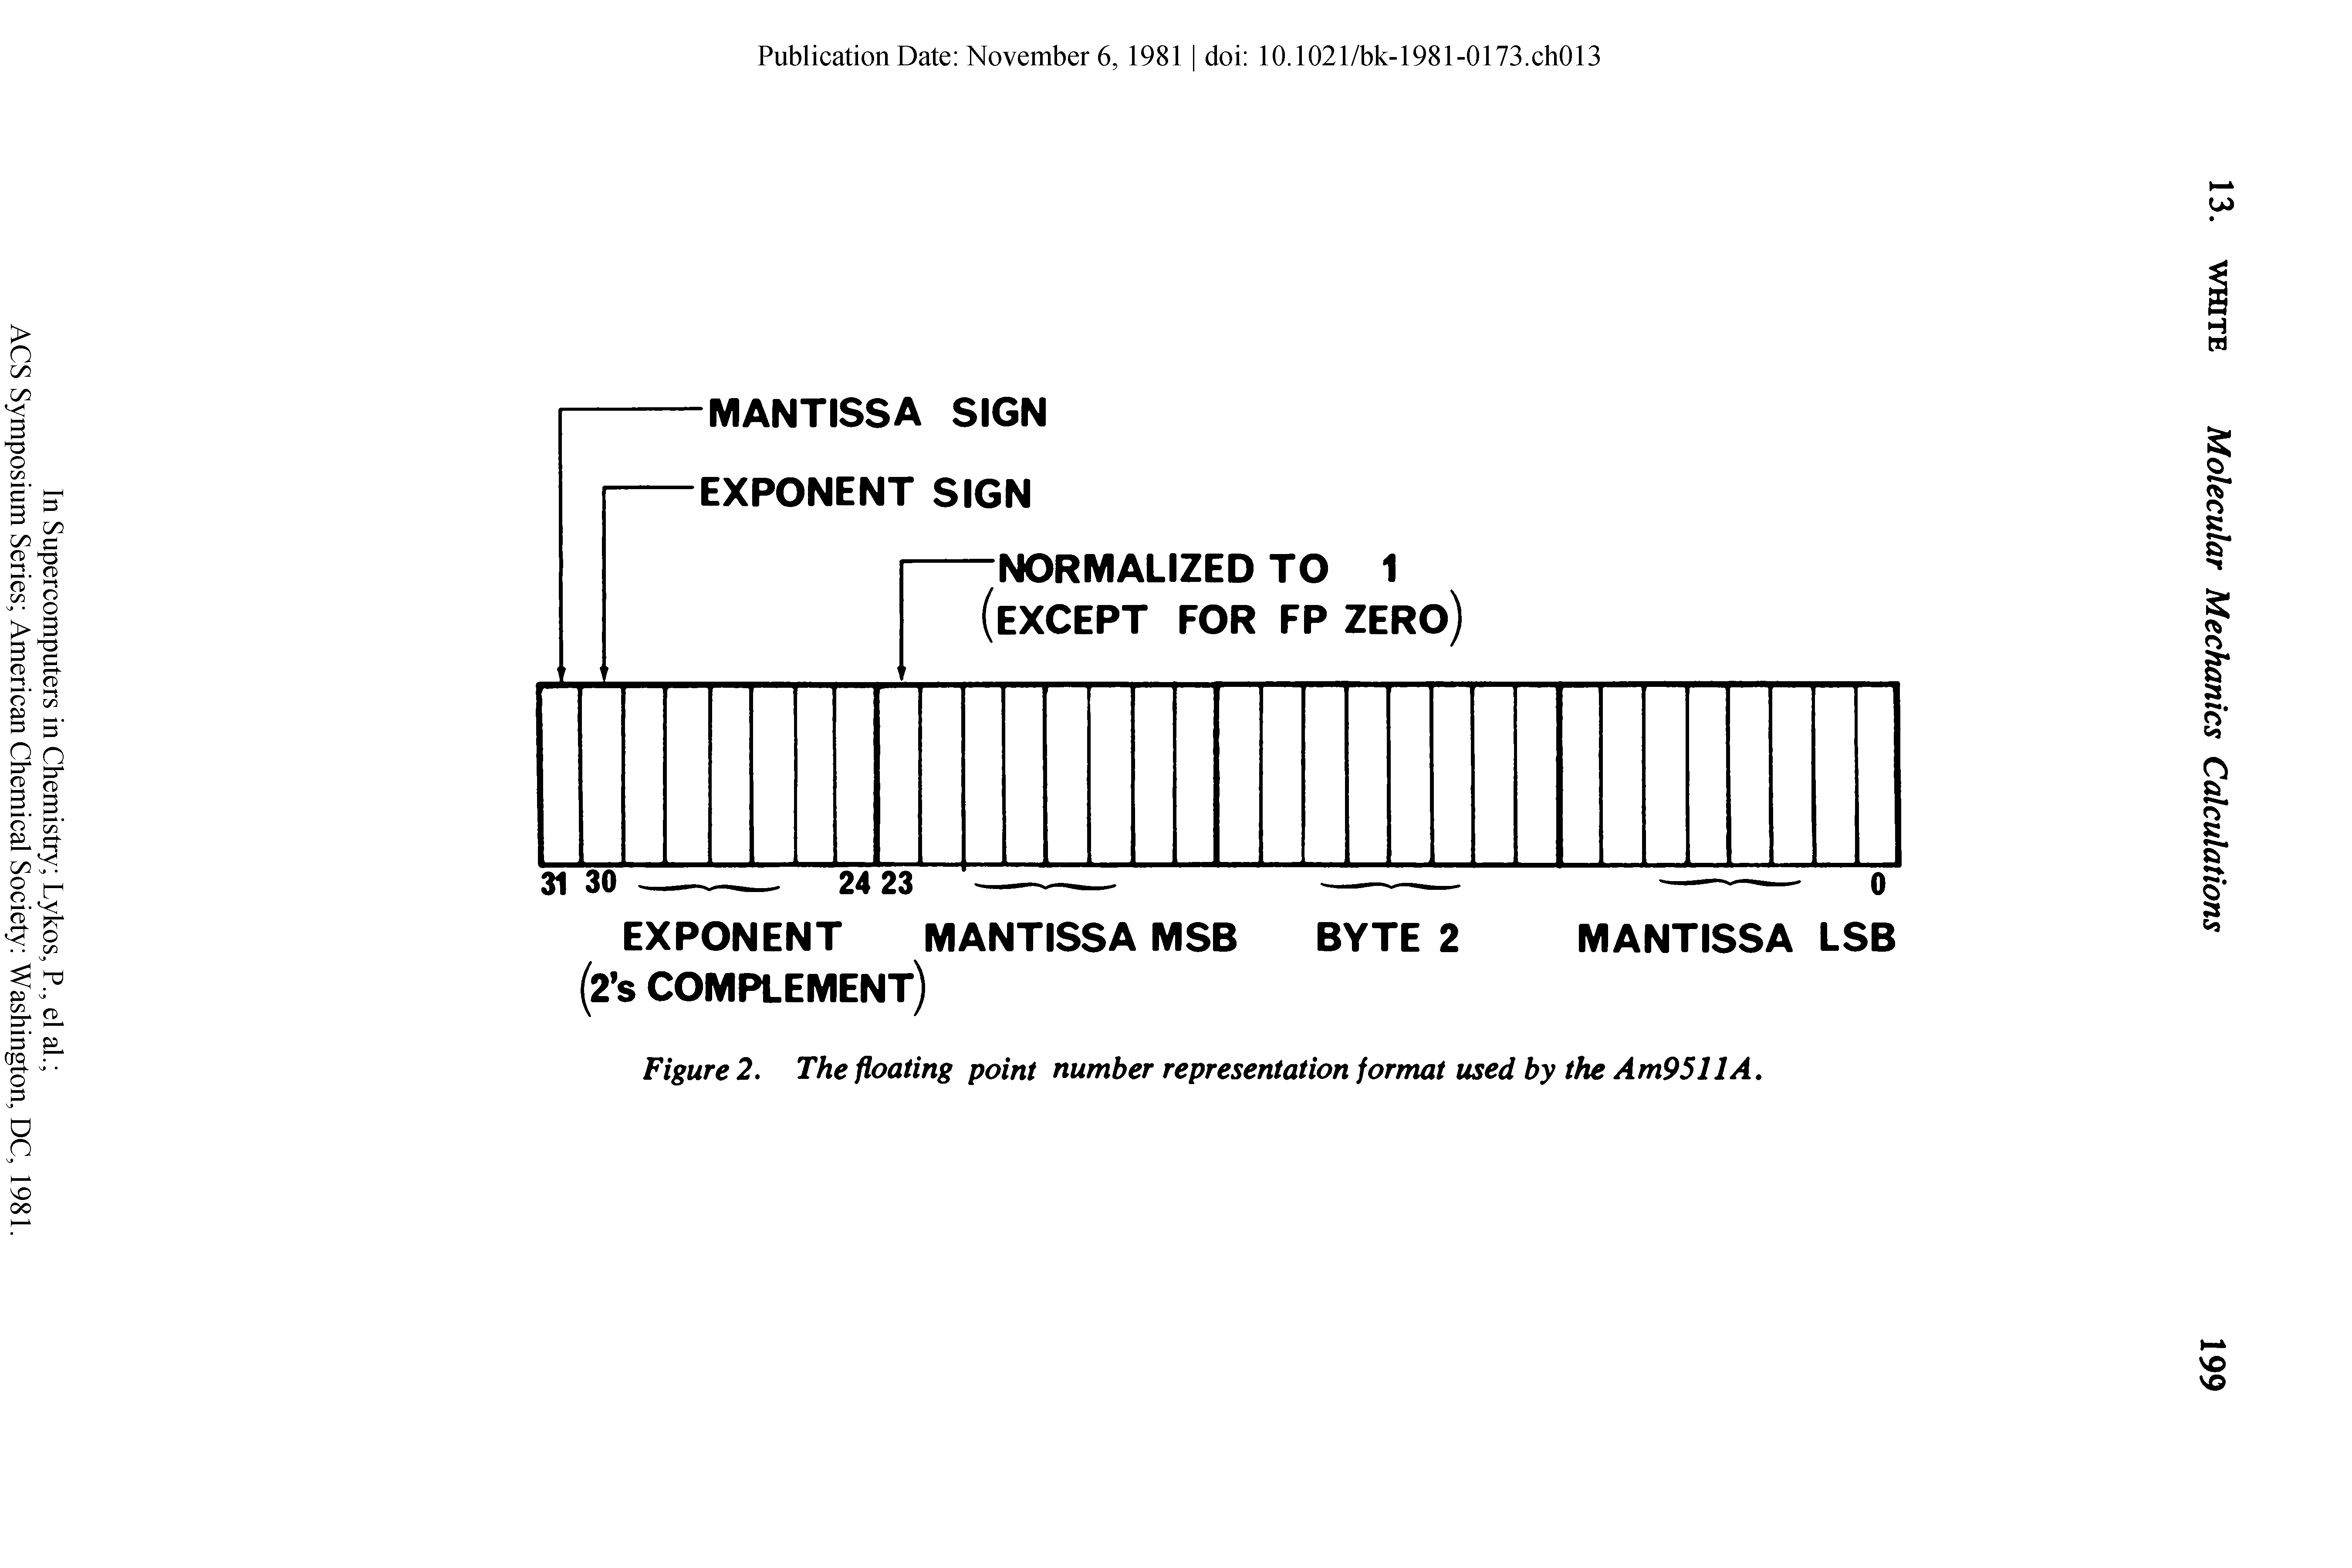 Figure 2. The floating point number representation format used by the Am9511A.